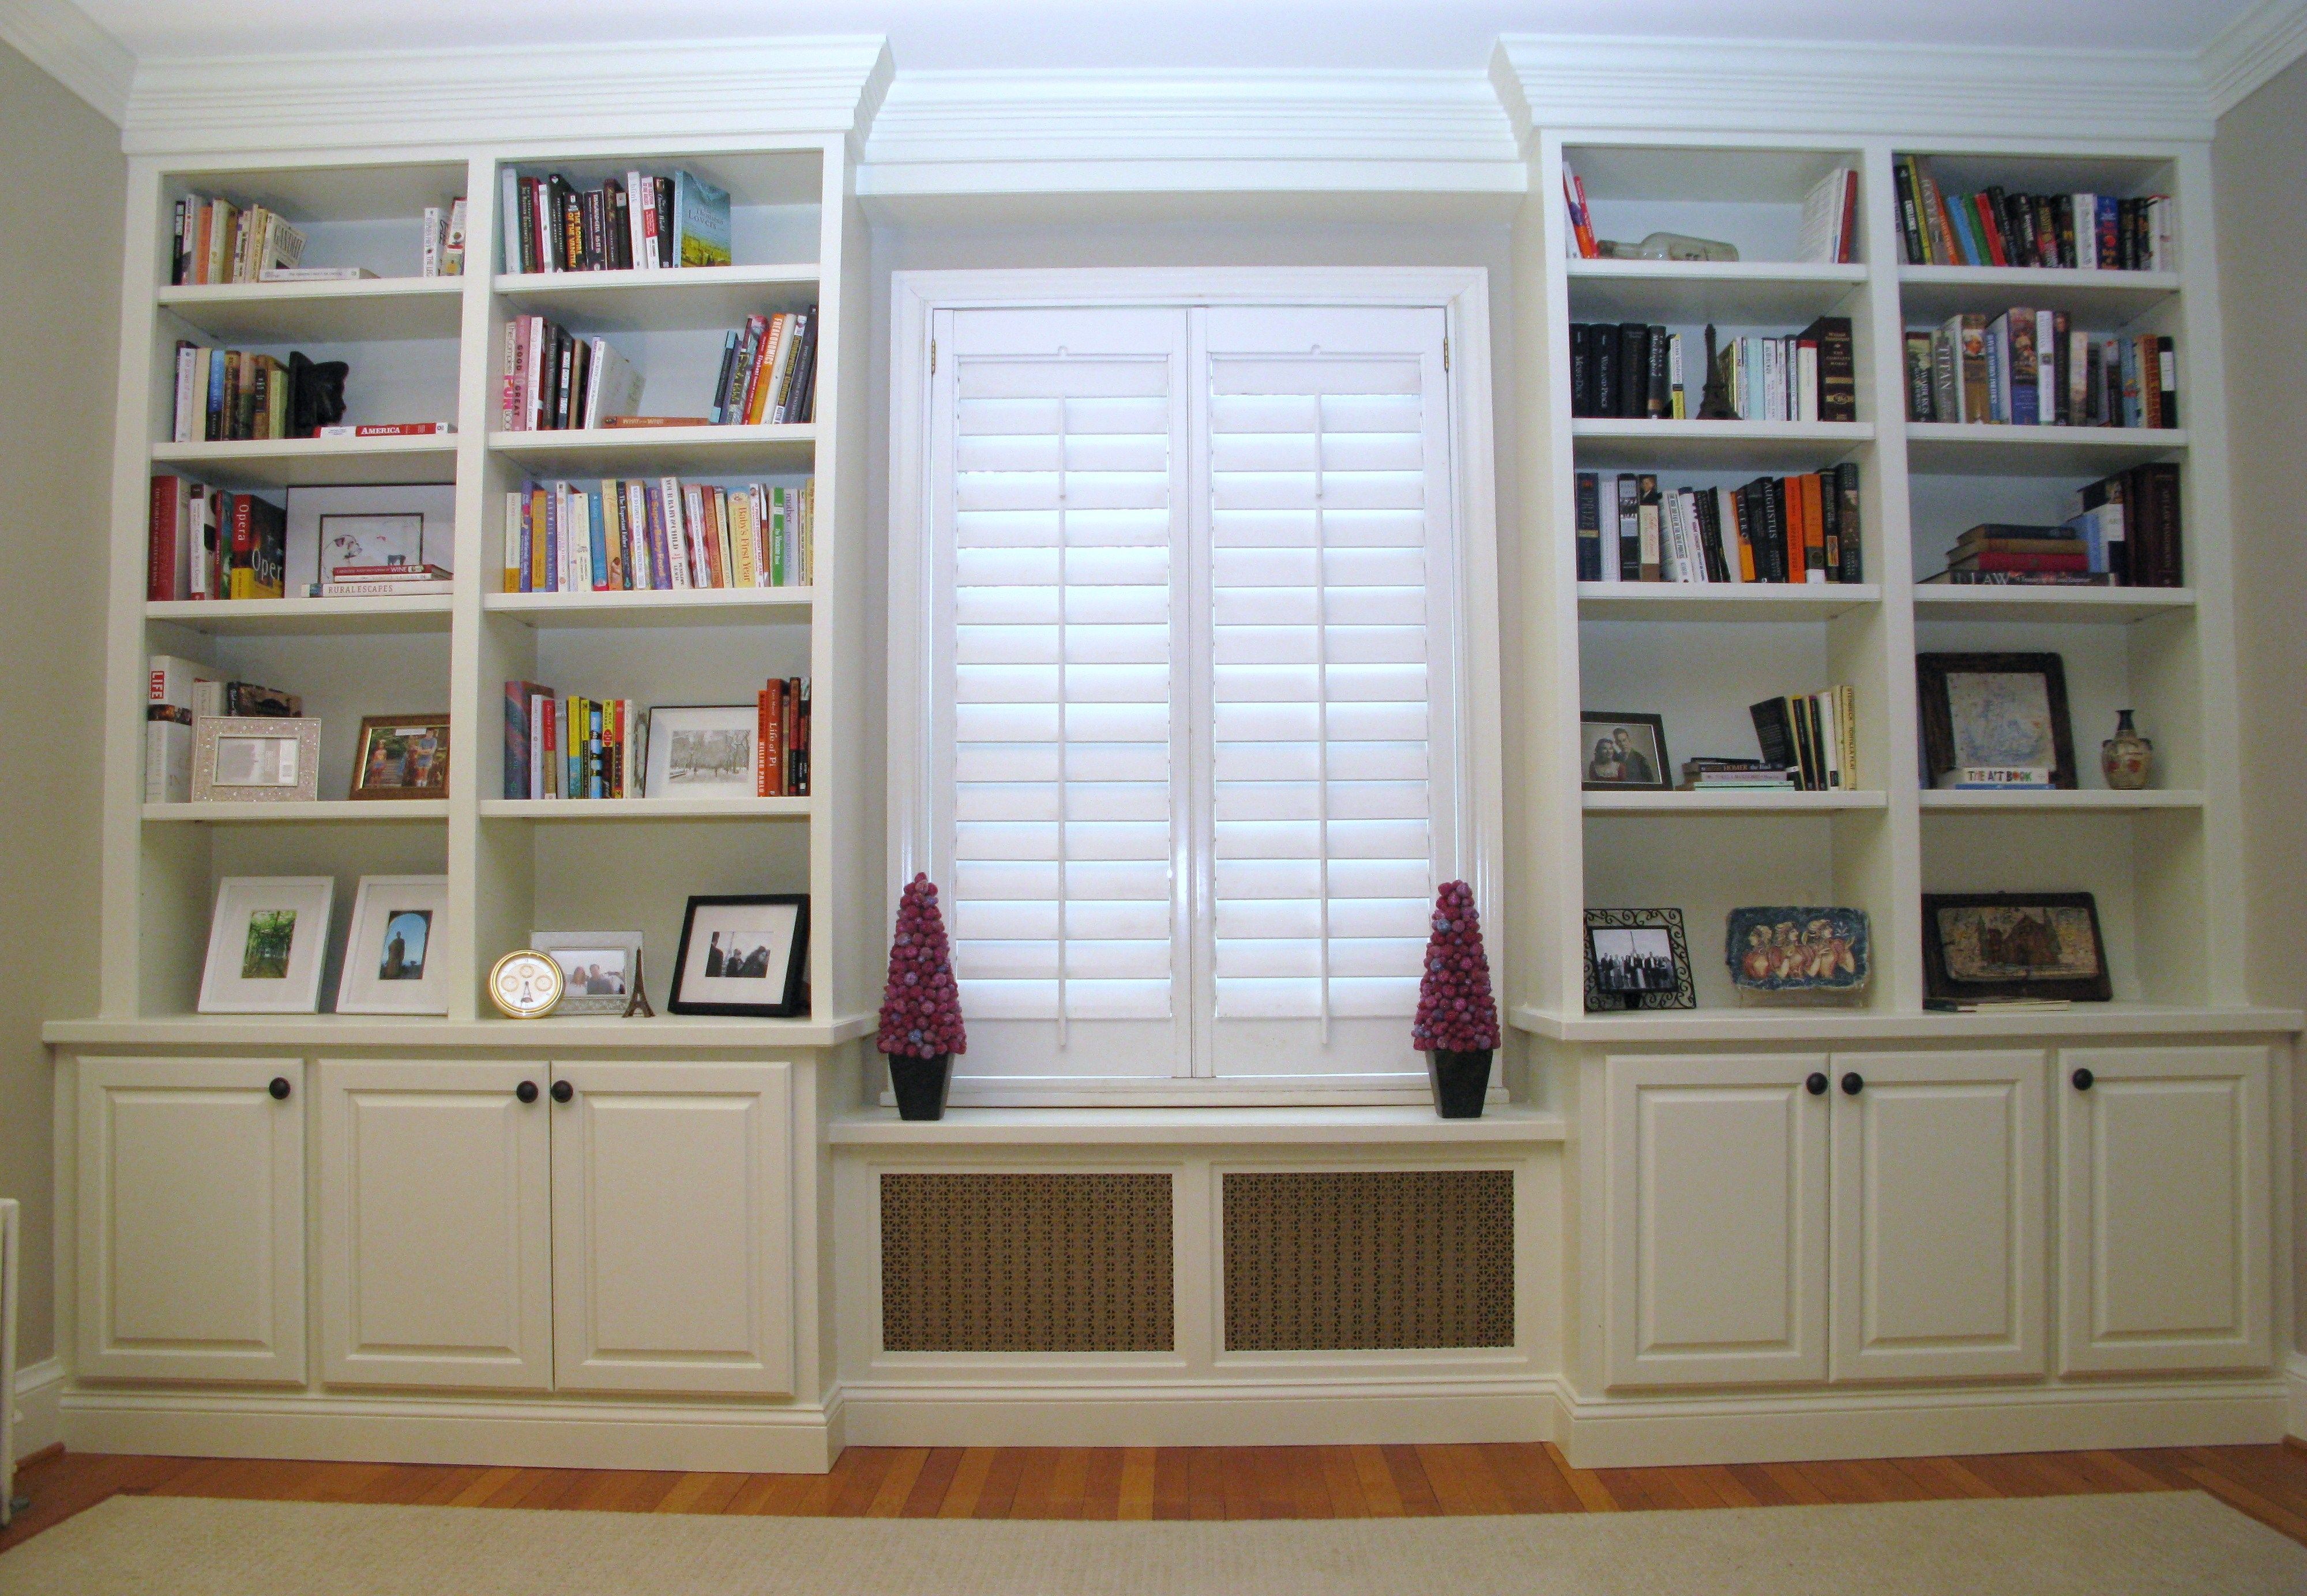 Custom Home Renovations Wasington Dc Archive Four Brothers Llc Intended For Radiator Cover And Bookcase (View 6 of 15)